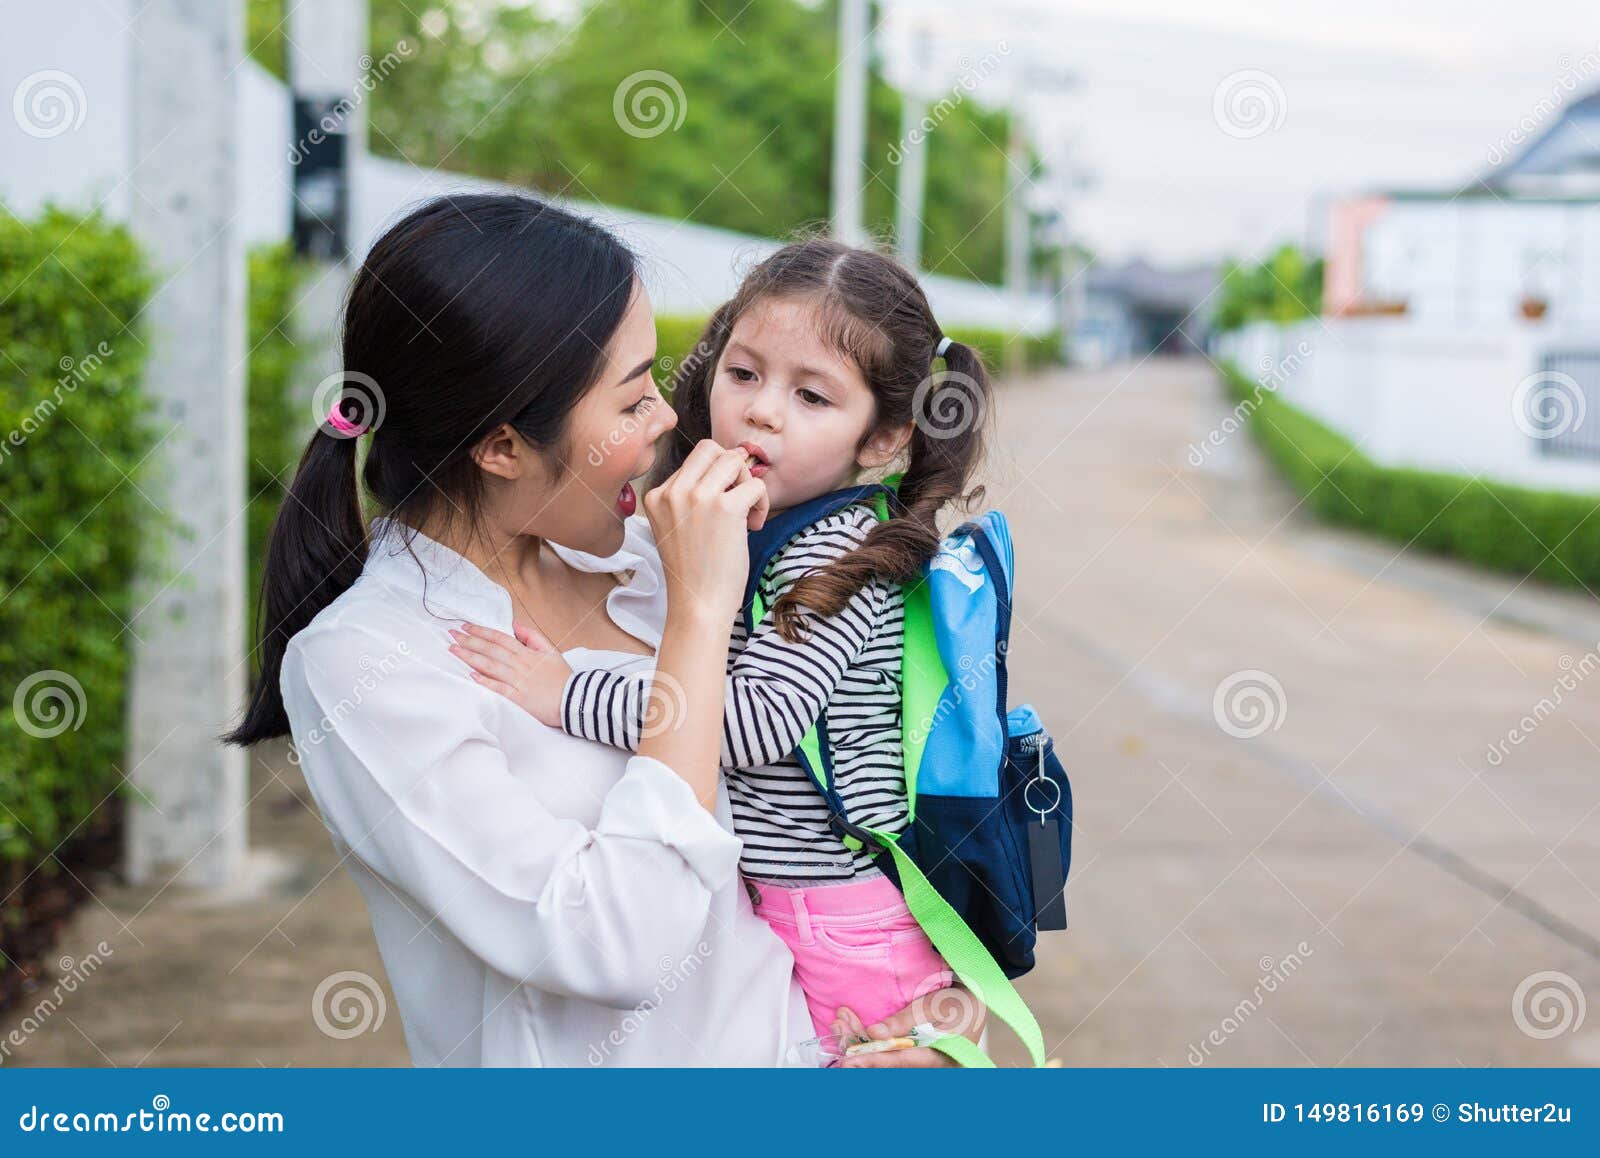 Mom Feeding Her Daughter With Snack Before Going To School B